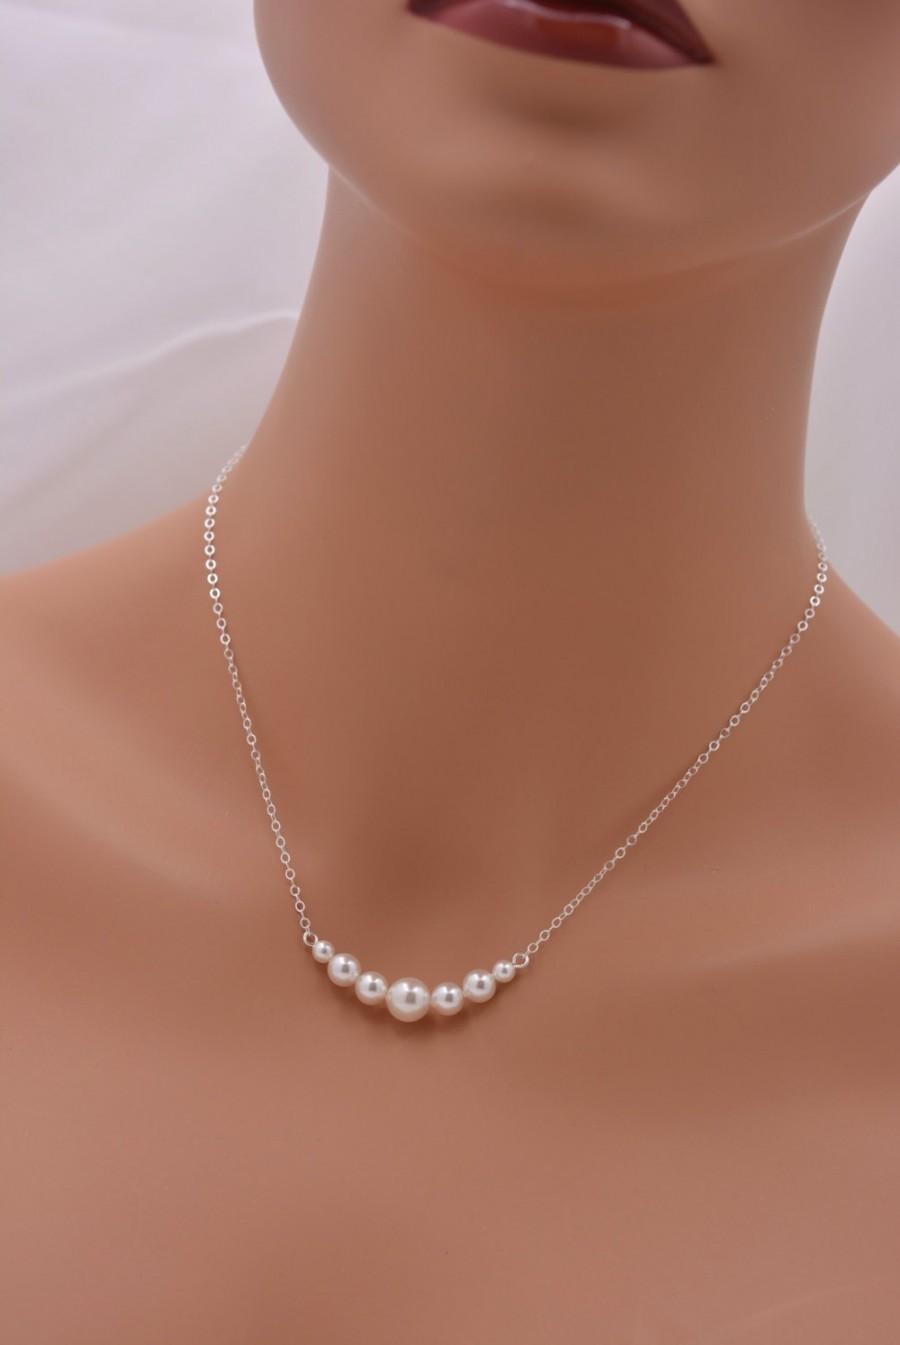 Wedding - Set of 6 Pearl Necklaces, 6 Bridesmaid Pearl Necklaces, 925 Sterling Silver Necklaces, Pearl Bar Necklace, Floating Pearls 0305